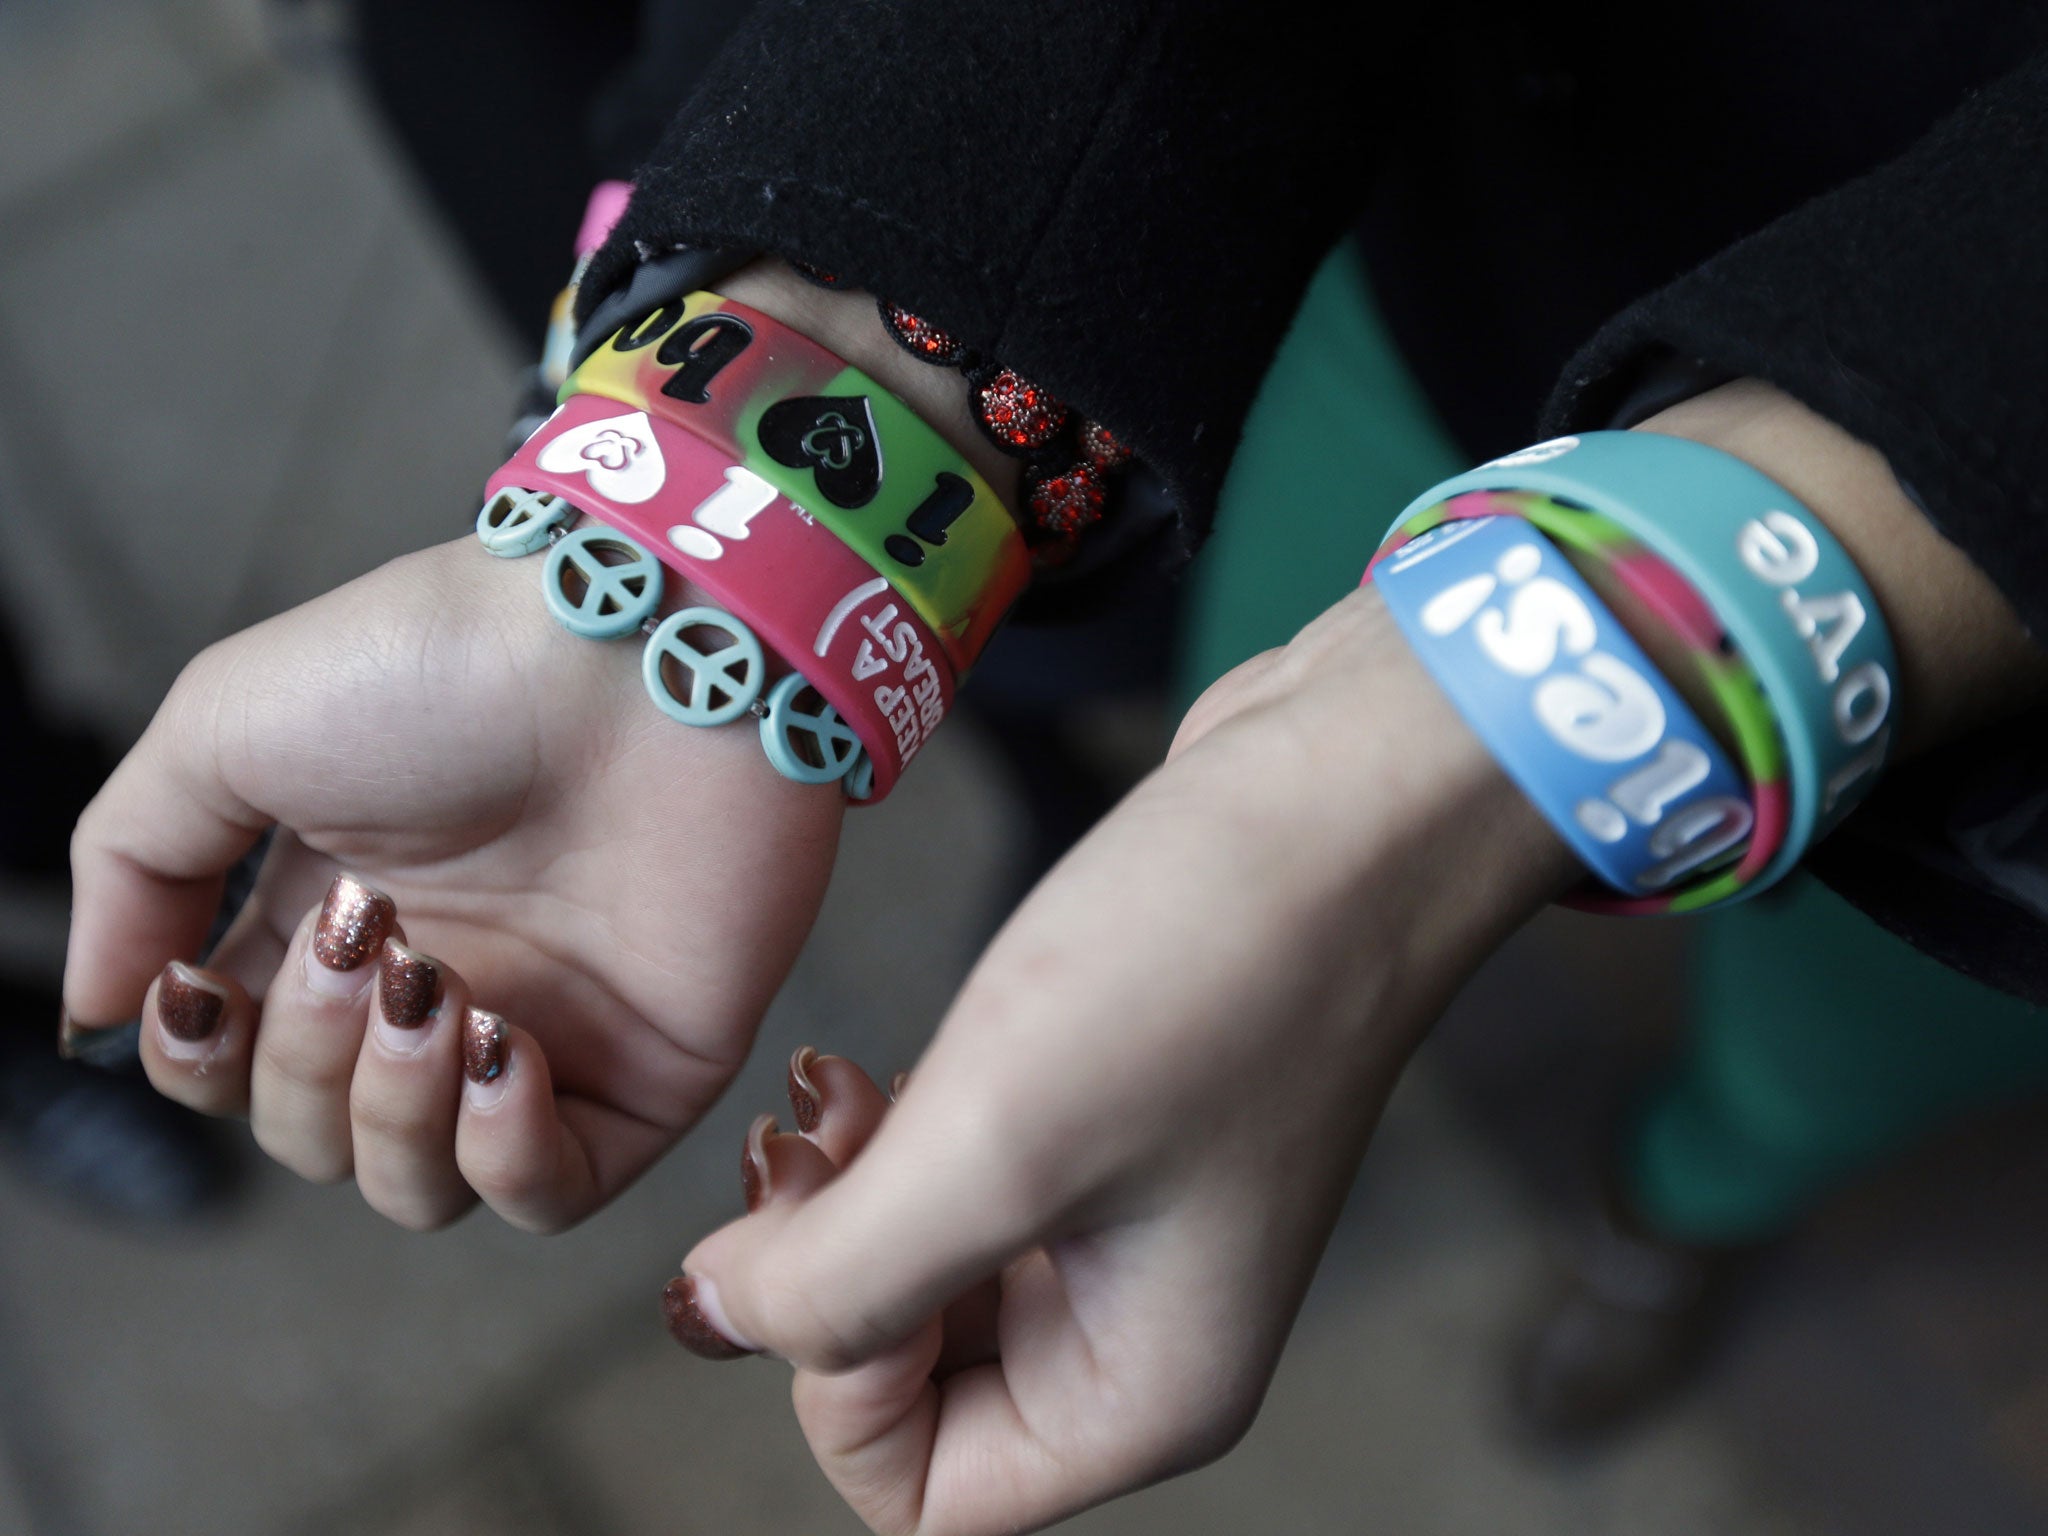 Easton Area School District student Kayla Martinez displays her bracelets for photographers outside the U.S. Courthouse in Philadelphia